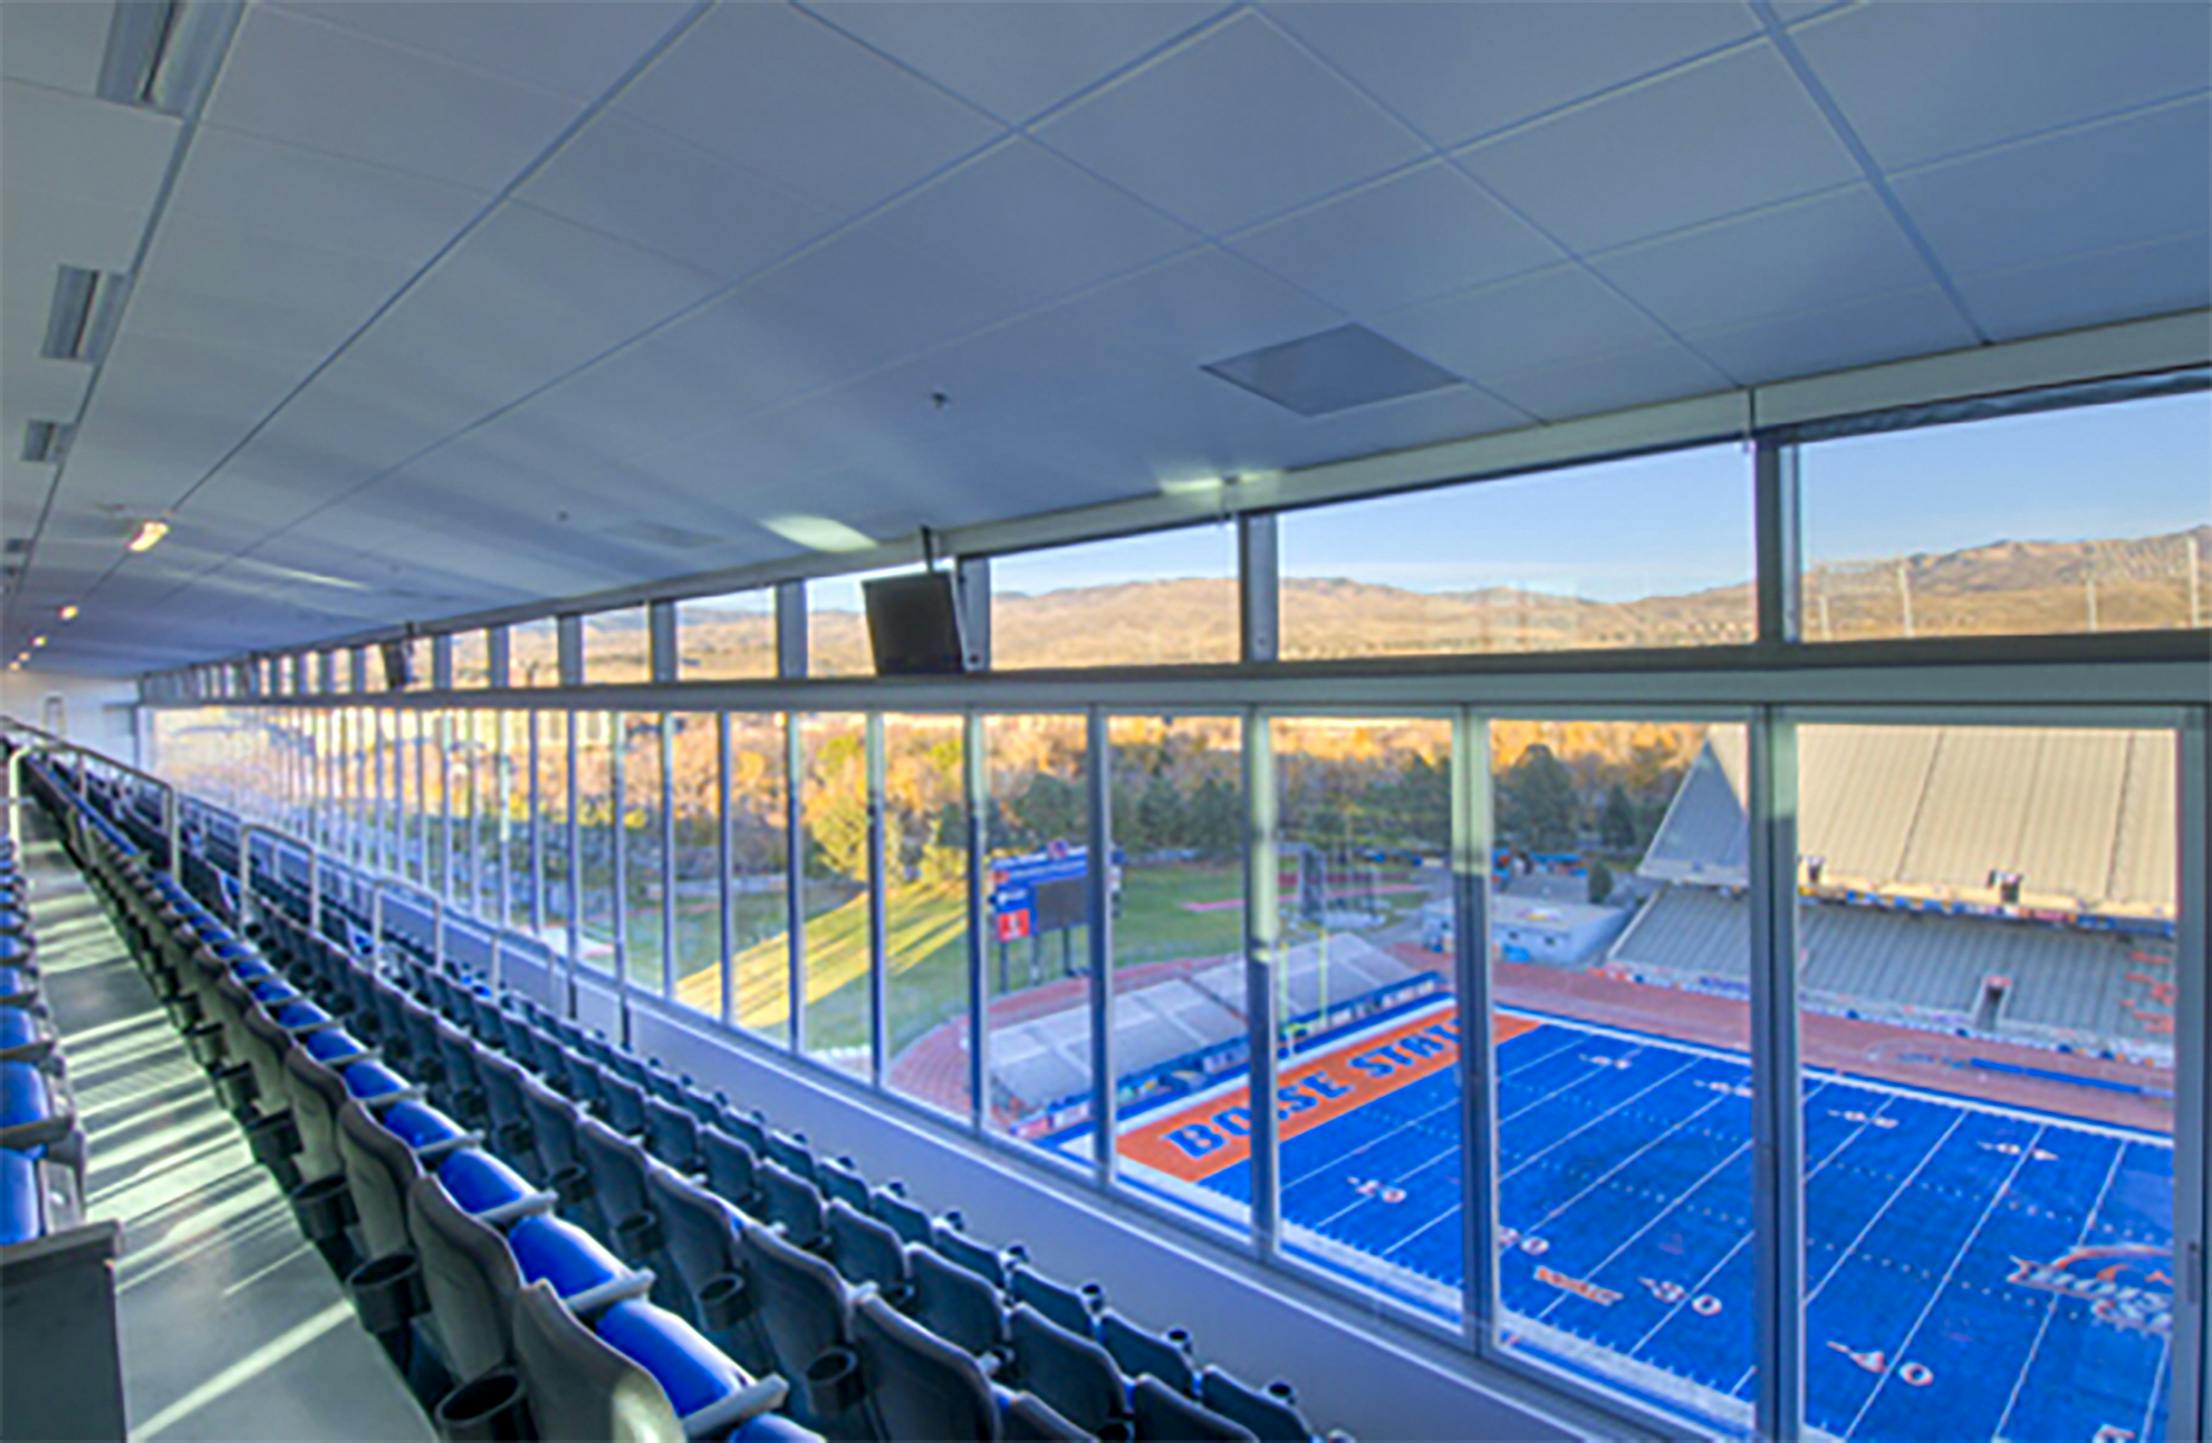 stadium design with sliding glass walls by NanaWall